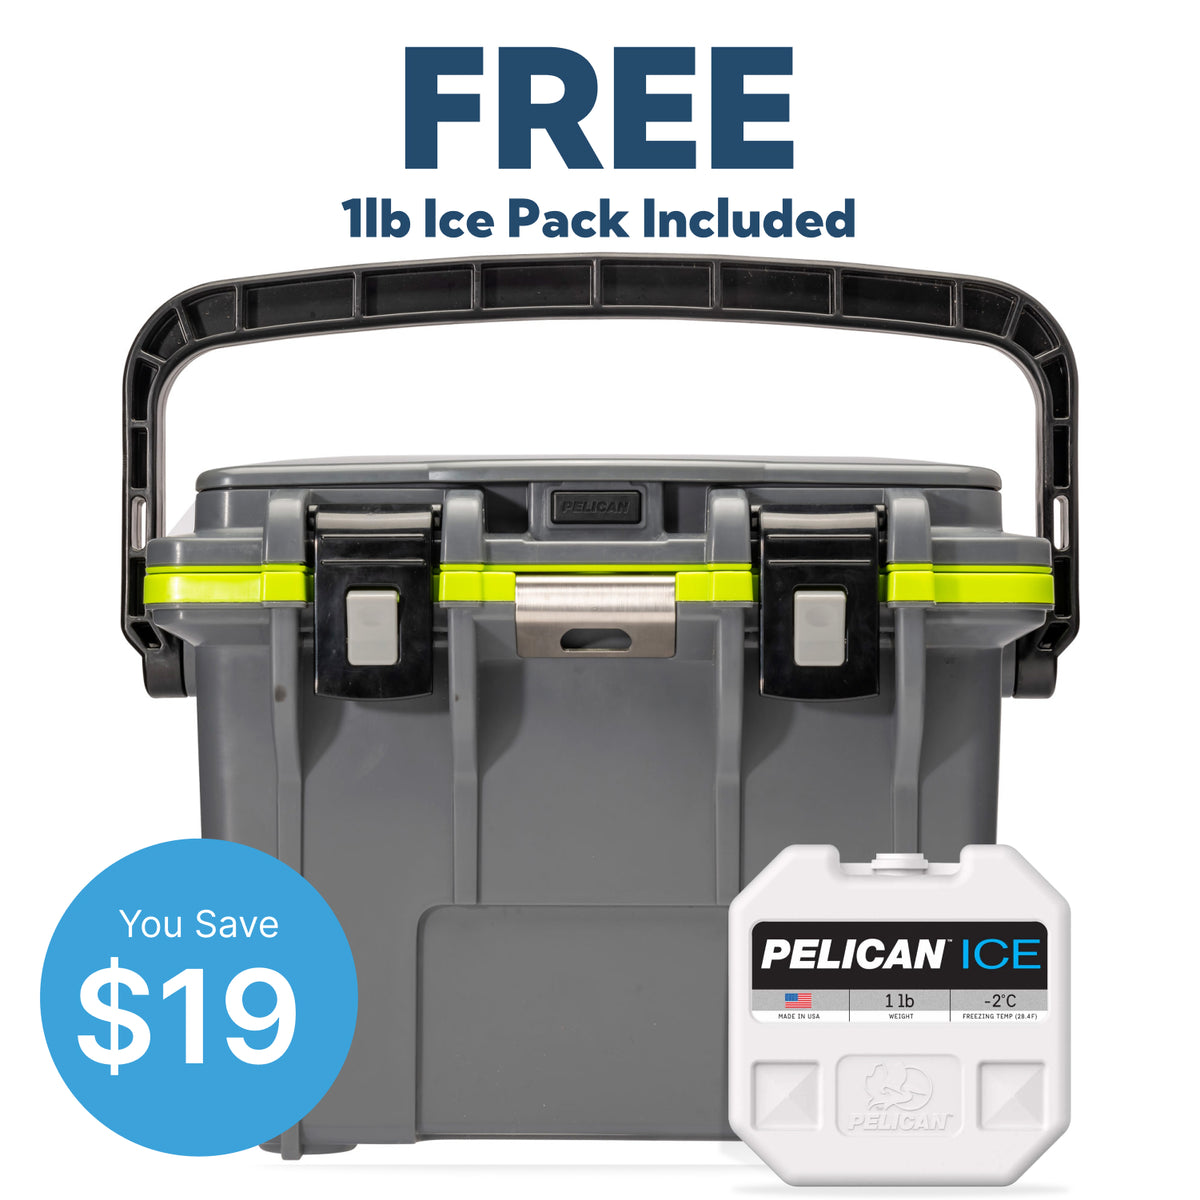 Dark Grey / Green Pelican 14QT Personal Cooler with Free 1lb Ice Pack